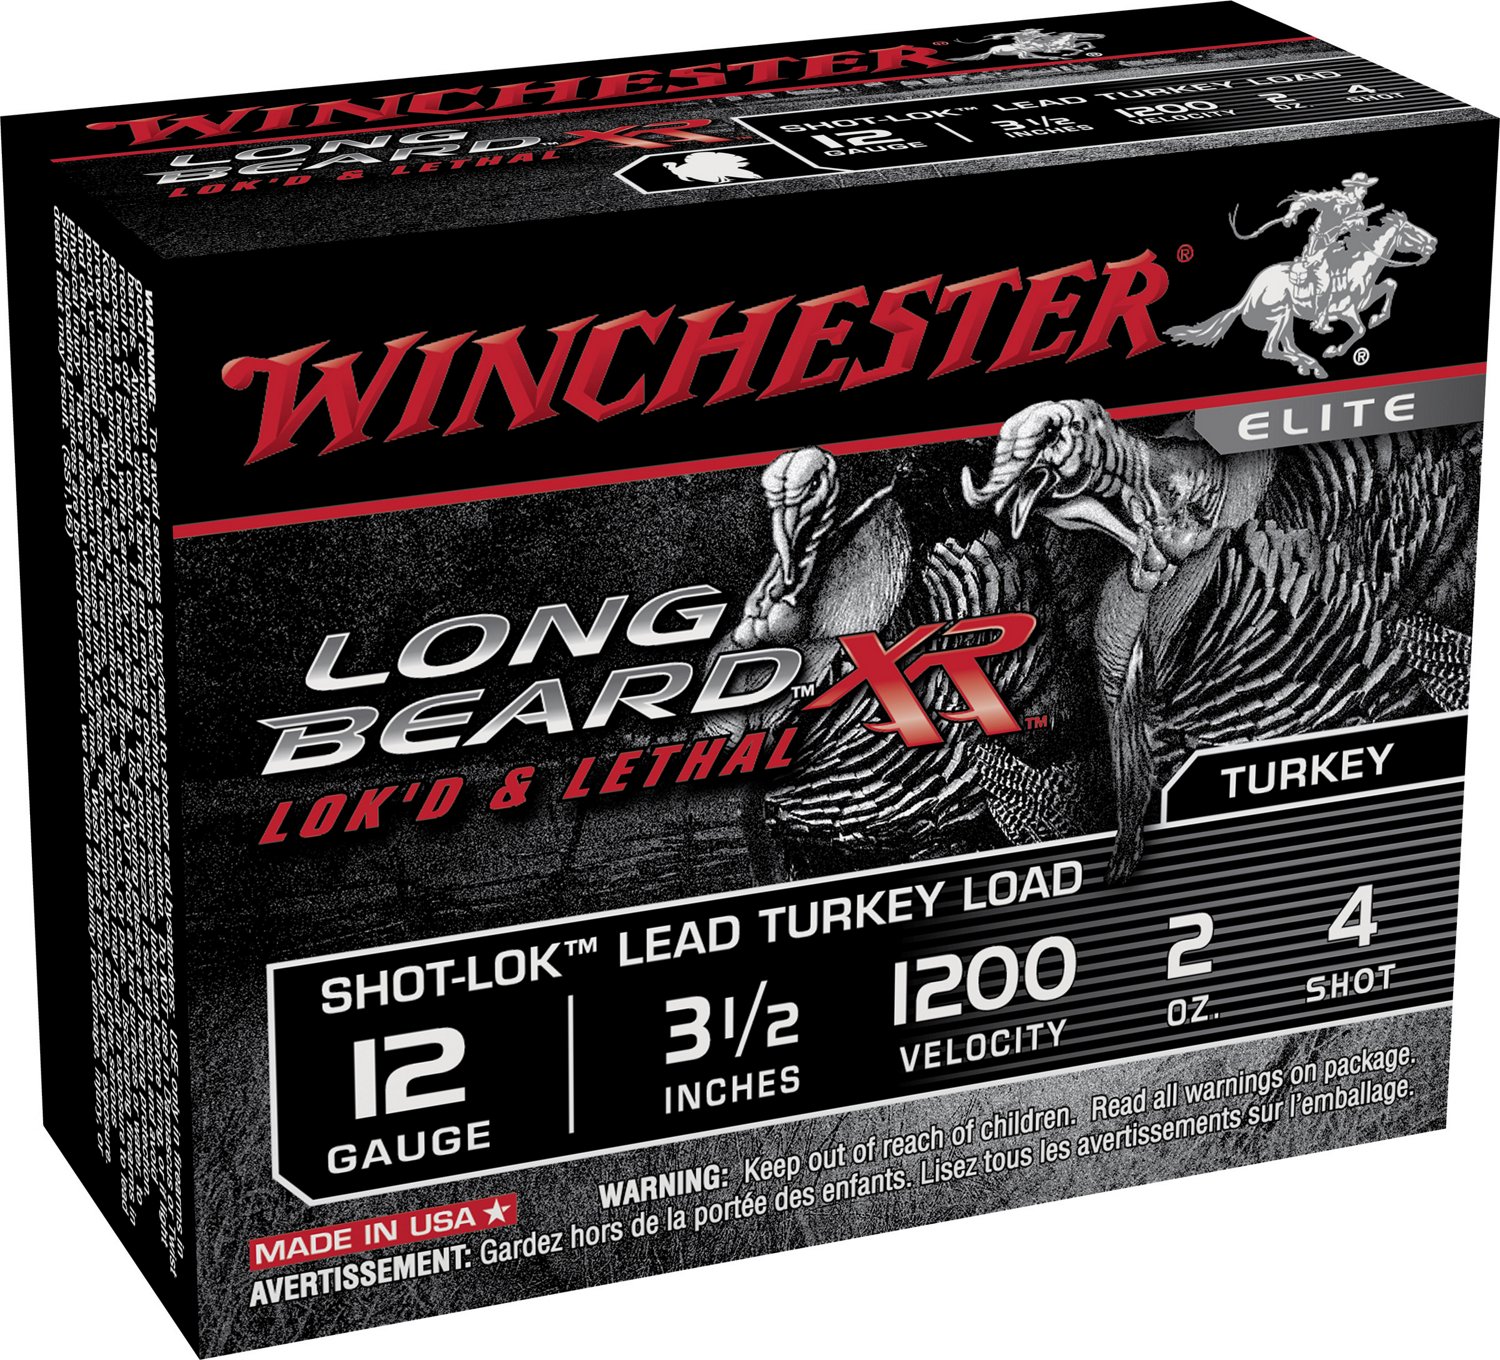 Winchester Long Beard XR 12 Gauge 3.5 inches 4 Shot Shotshells                                                                   - view number 1 selected